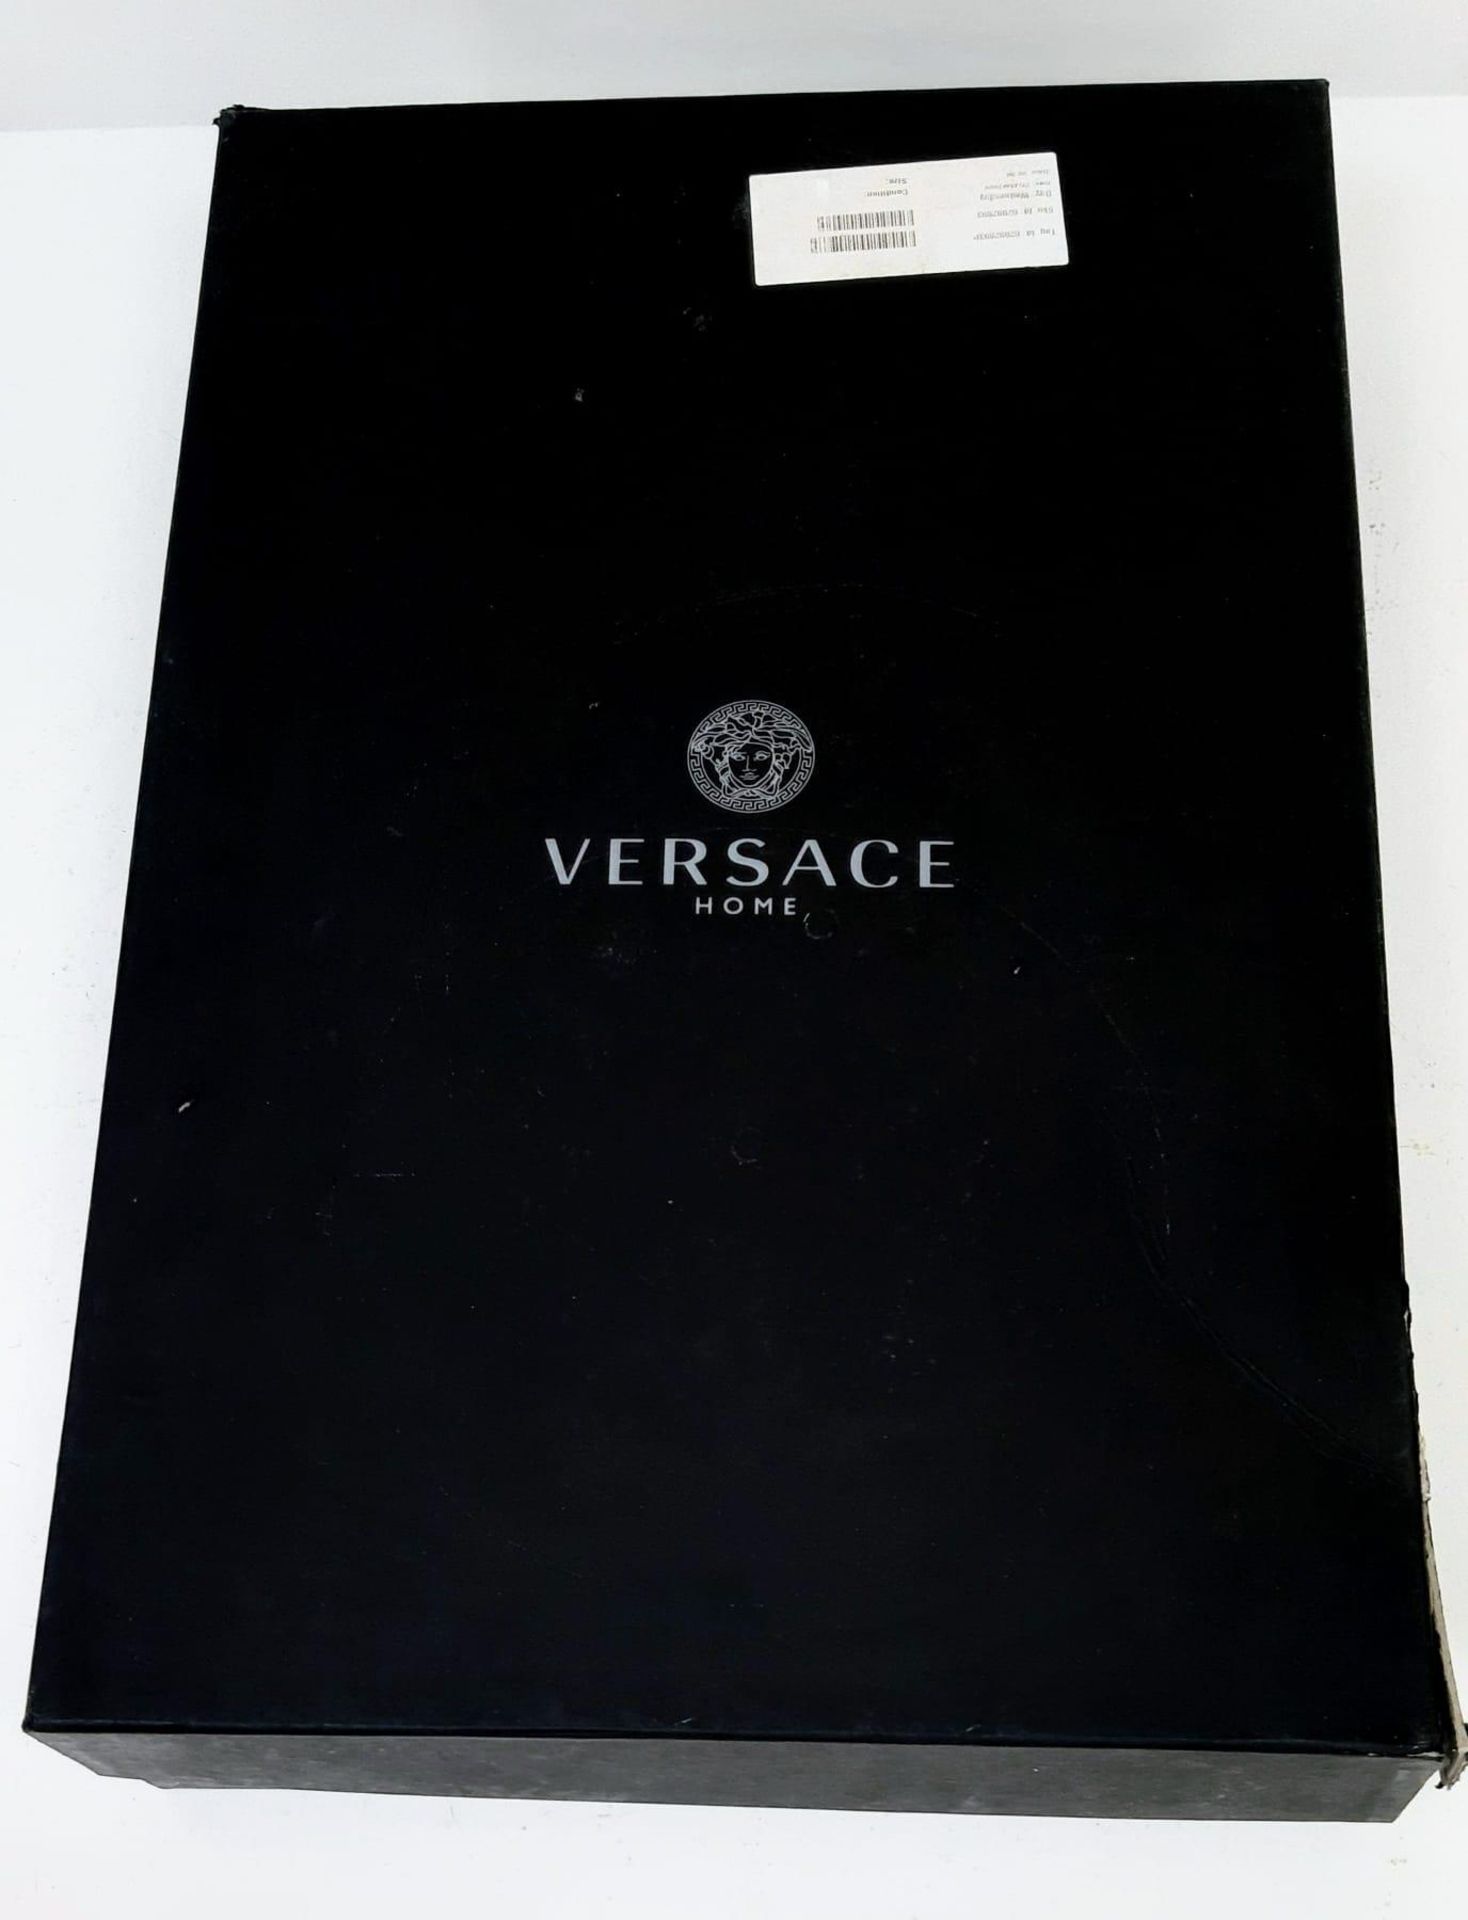 A VERCACE gents, bath robe, in new/unused condition with original presentation box. - Image 13 of 13